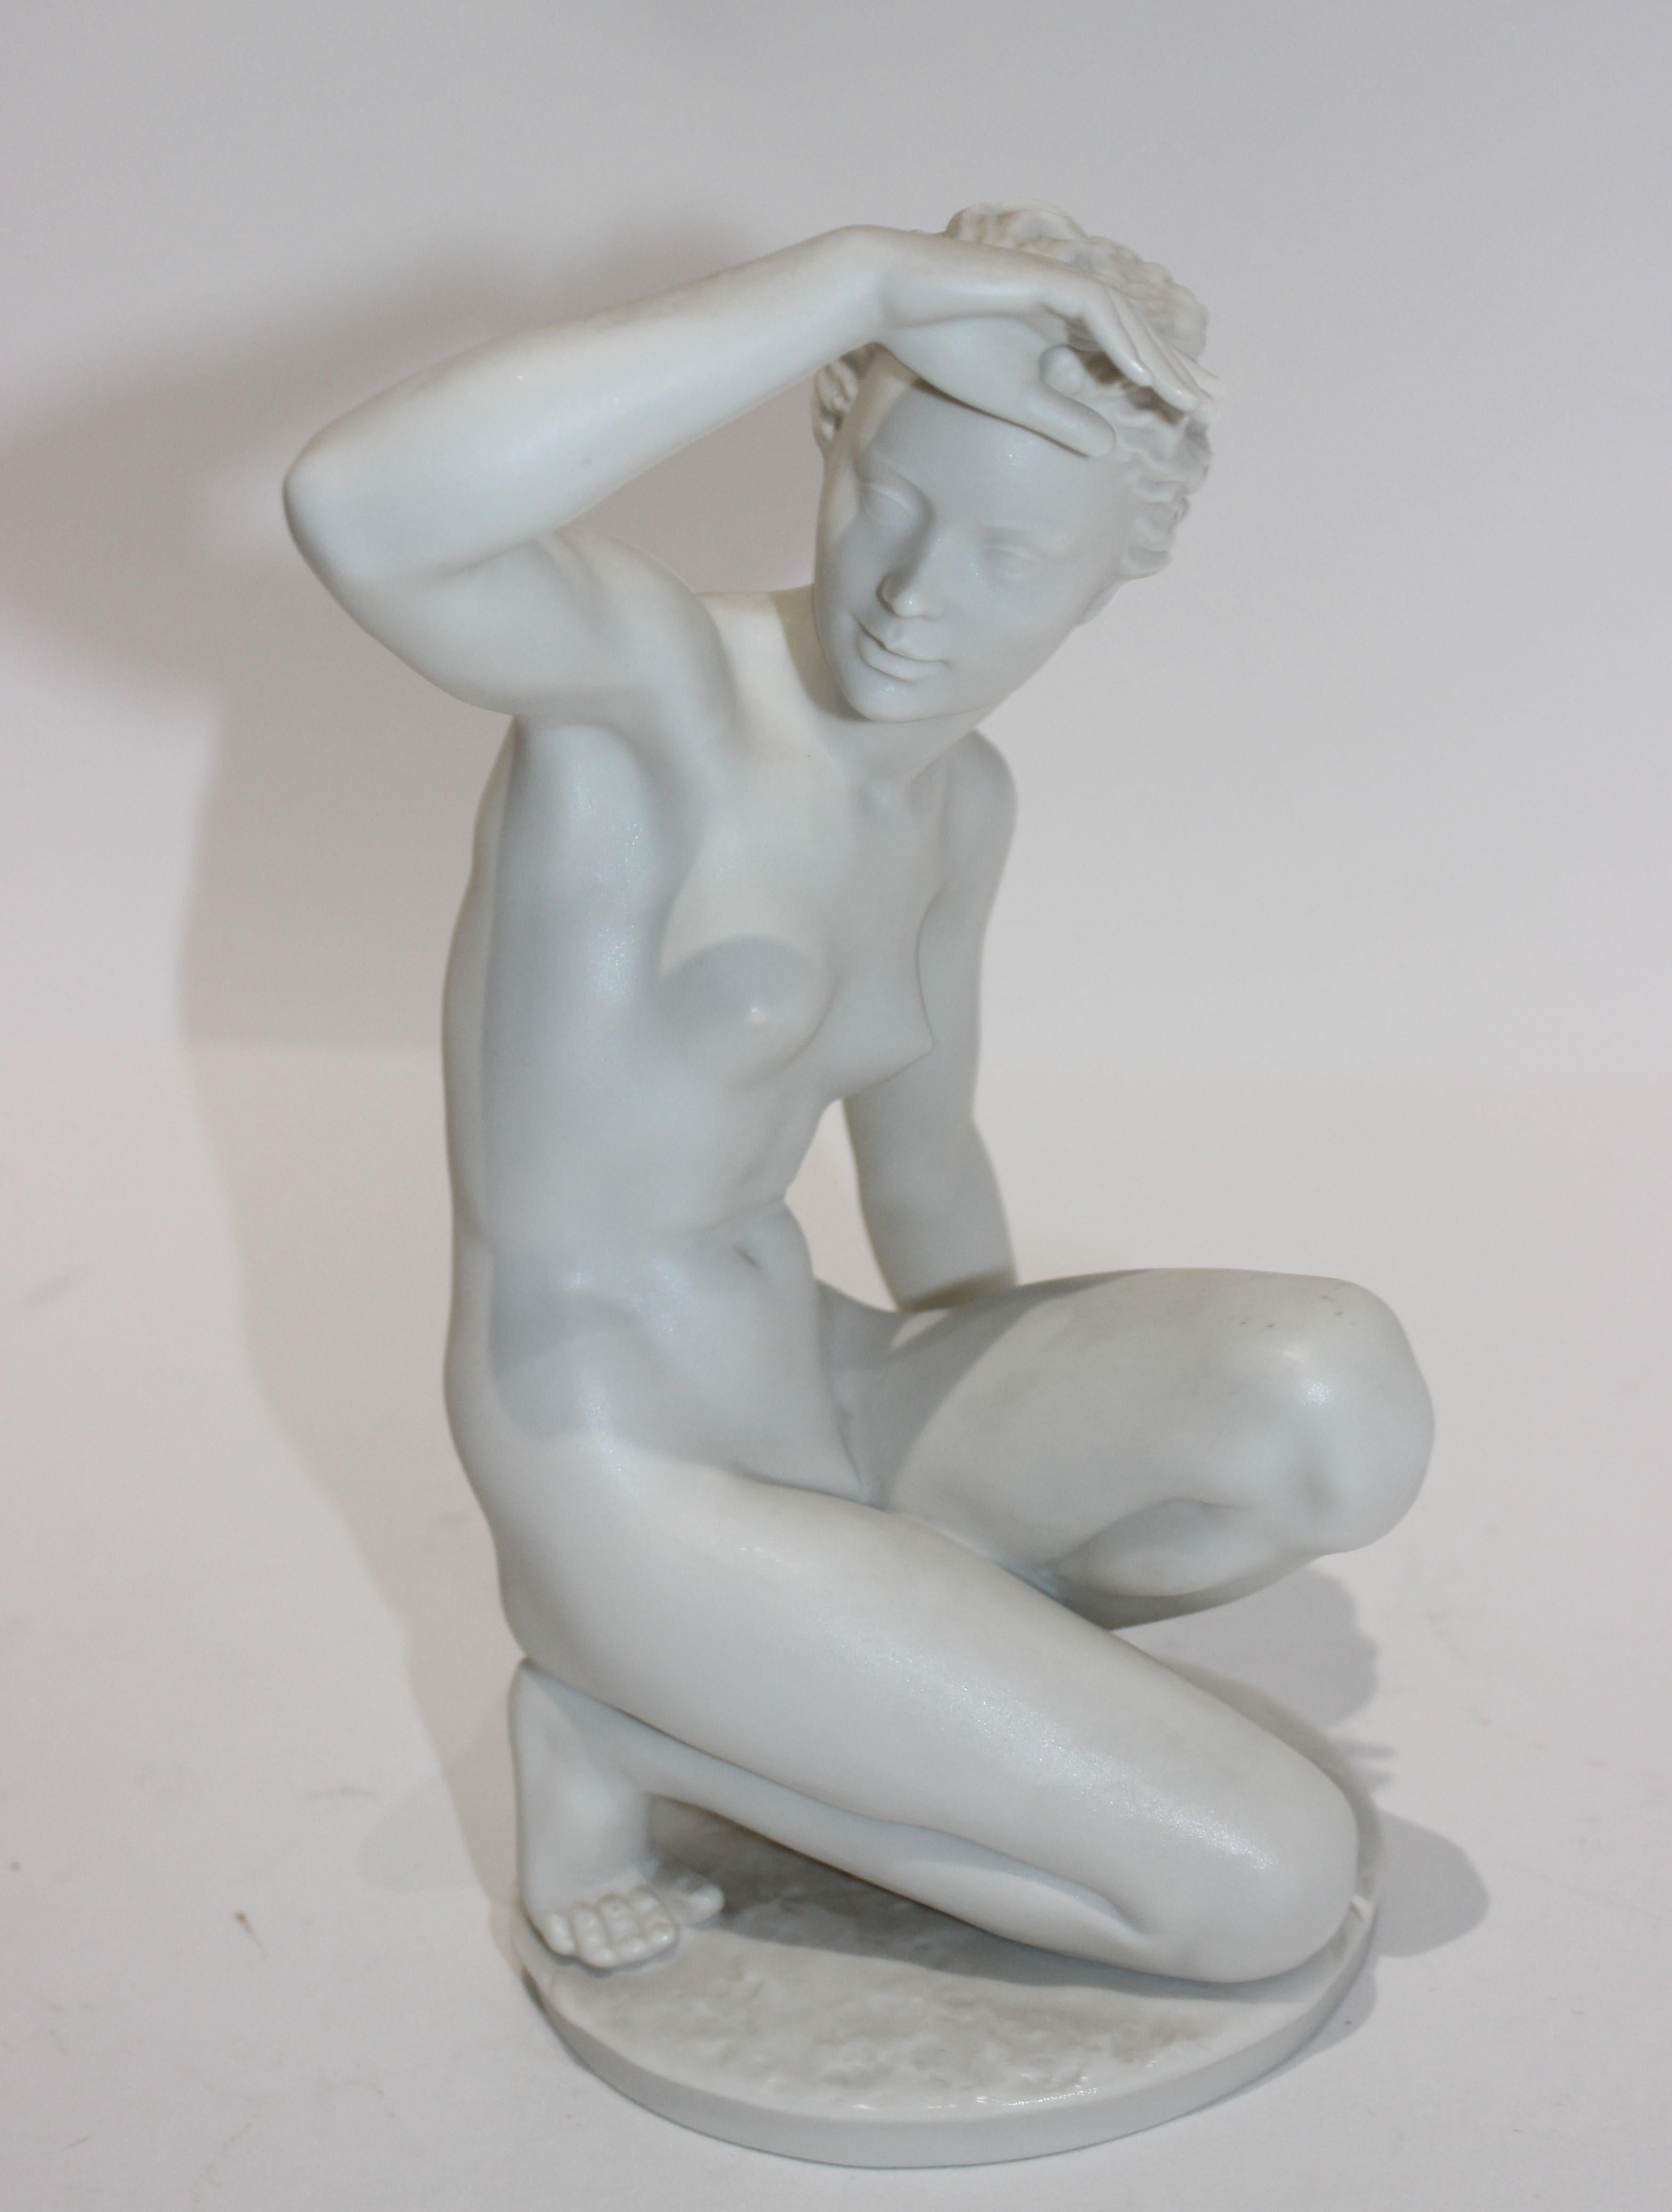 This stylish and chic bisque figure of a nude female dates to the 1960s, and is a reissue of an earlier 1940s piece produced by Hutschenreuther of Germany. 